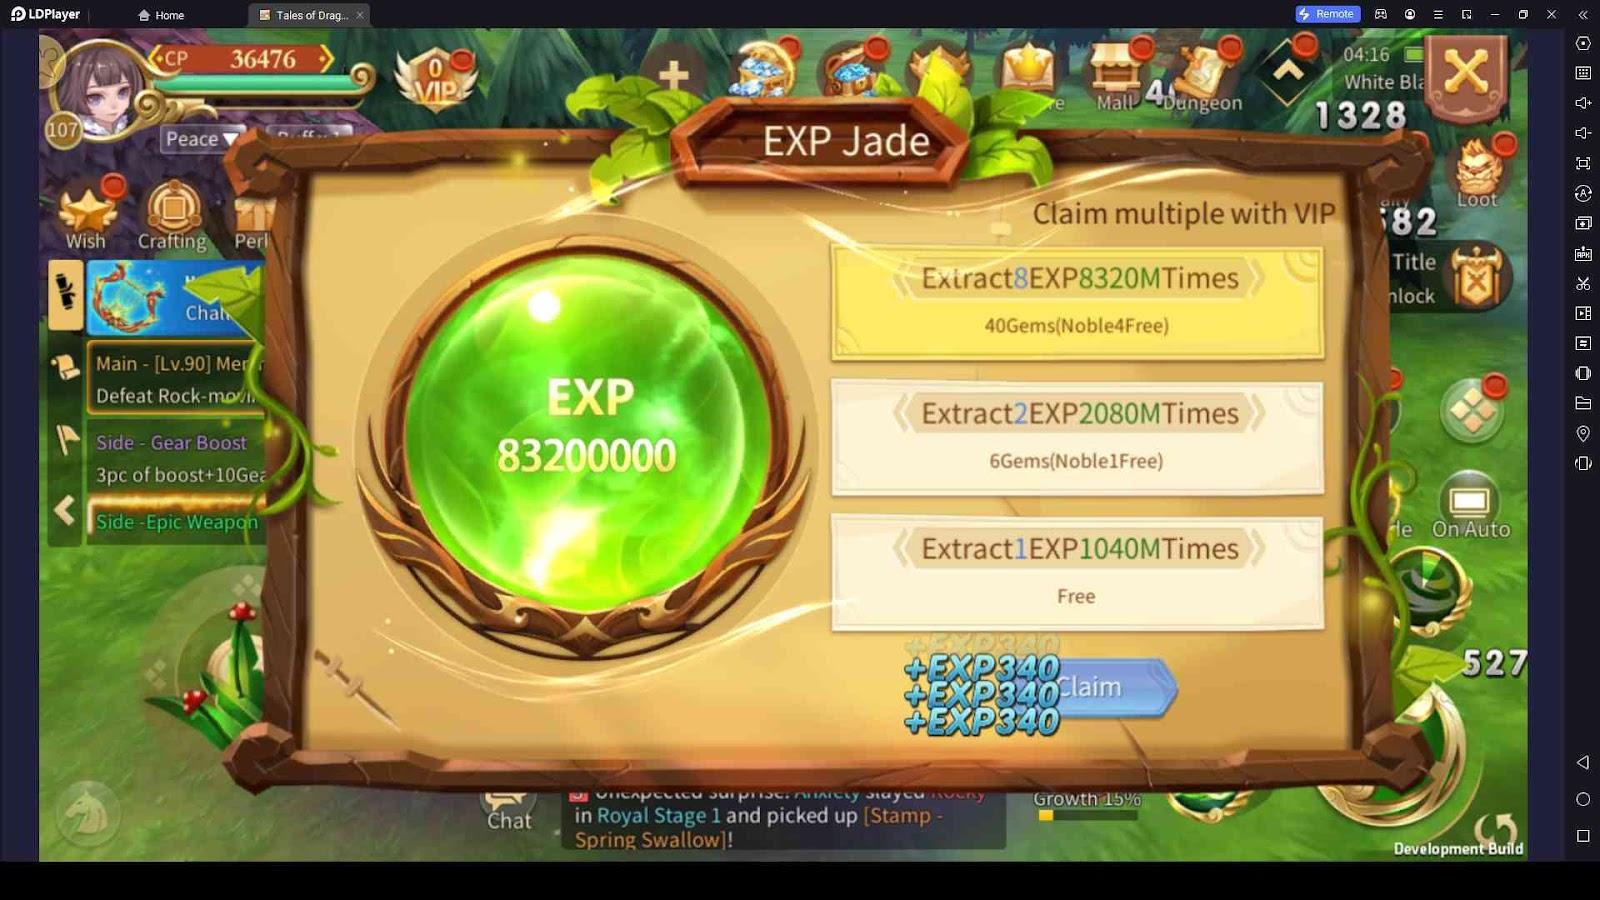 Earn More EXPs as Much as You Can